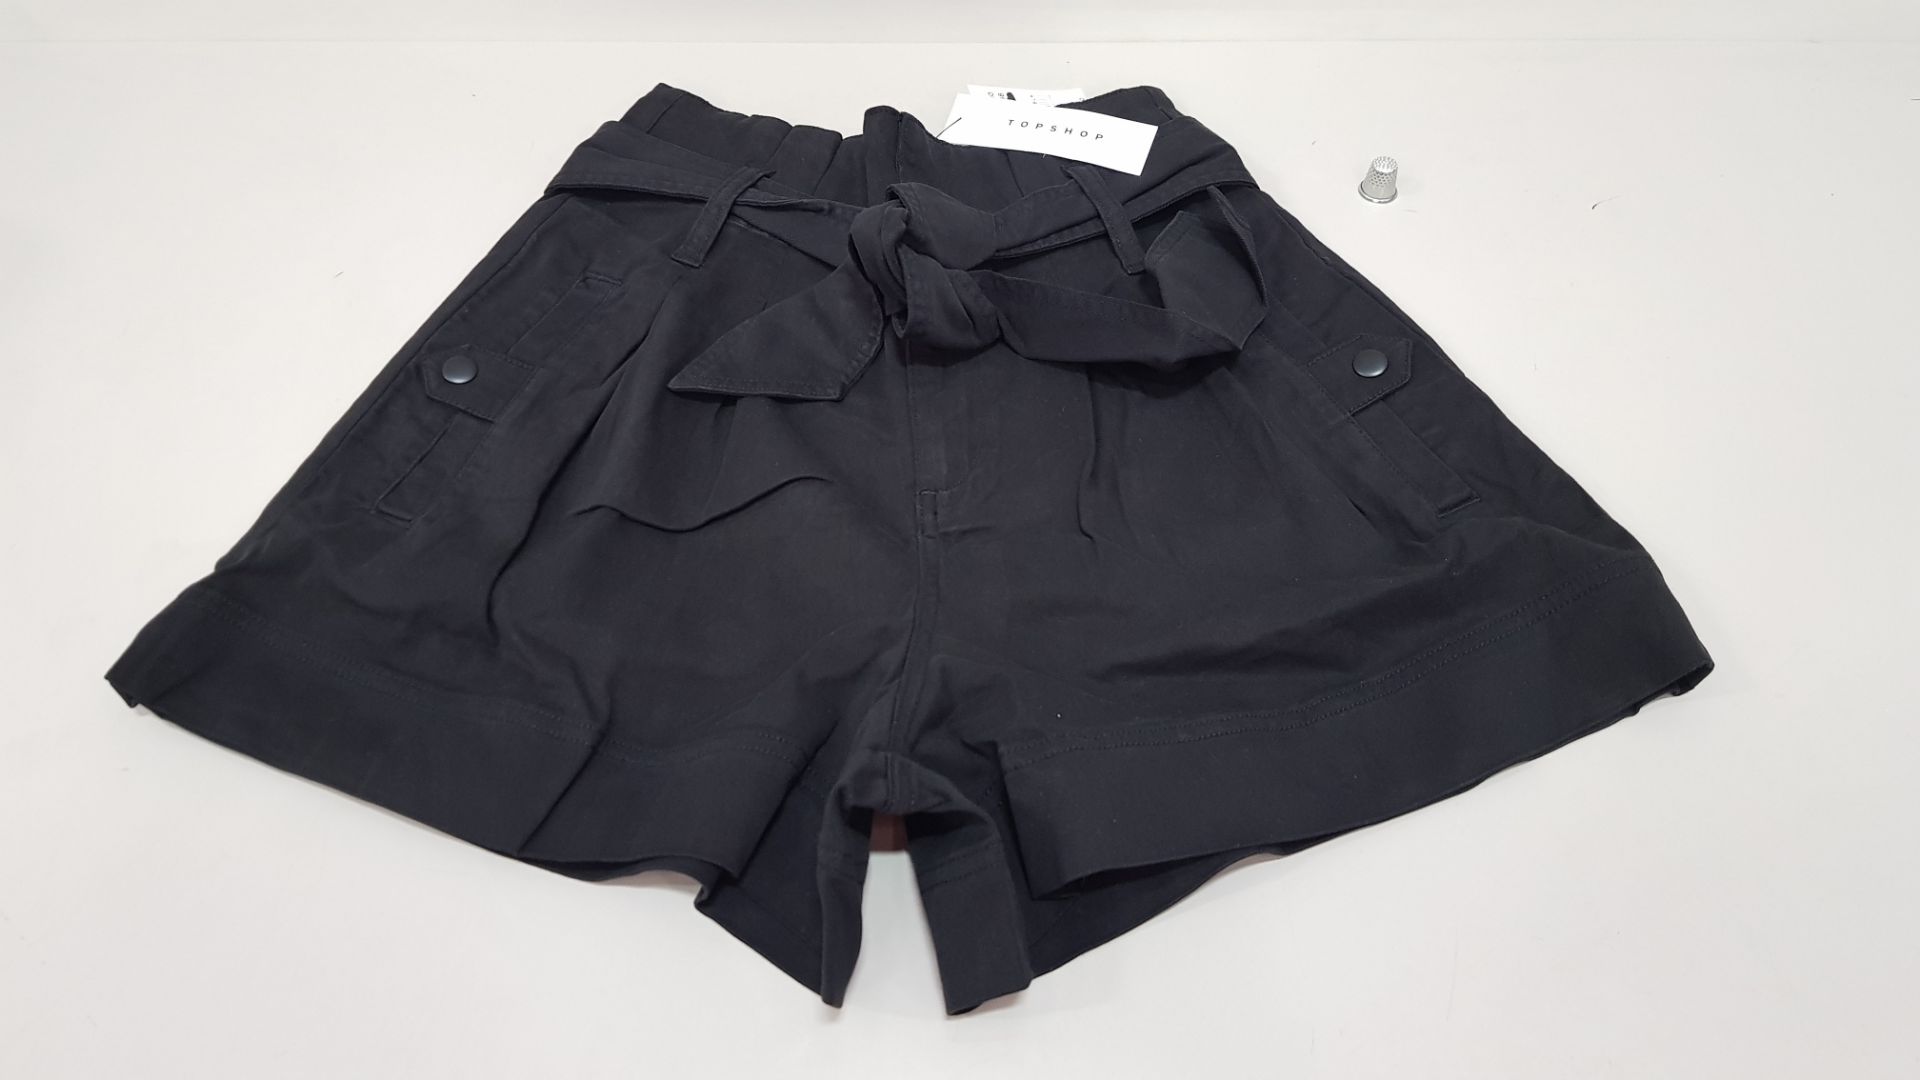 14 X BRAND NEW TOPSHOP SHORTS UK SIZE 6 AND 12 RRP £29.00 (TOTAL RRP £406.00)